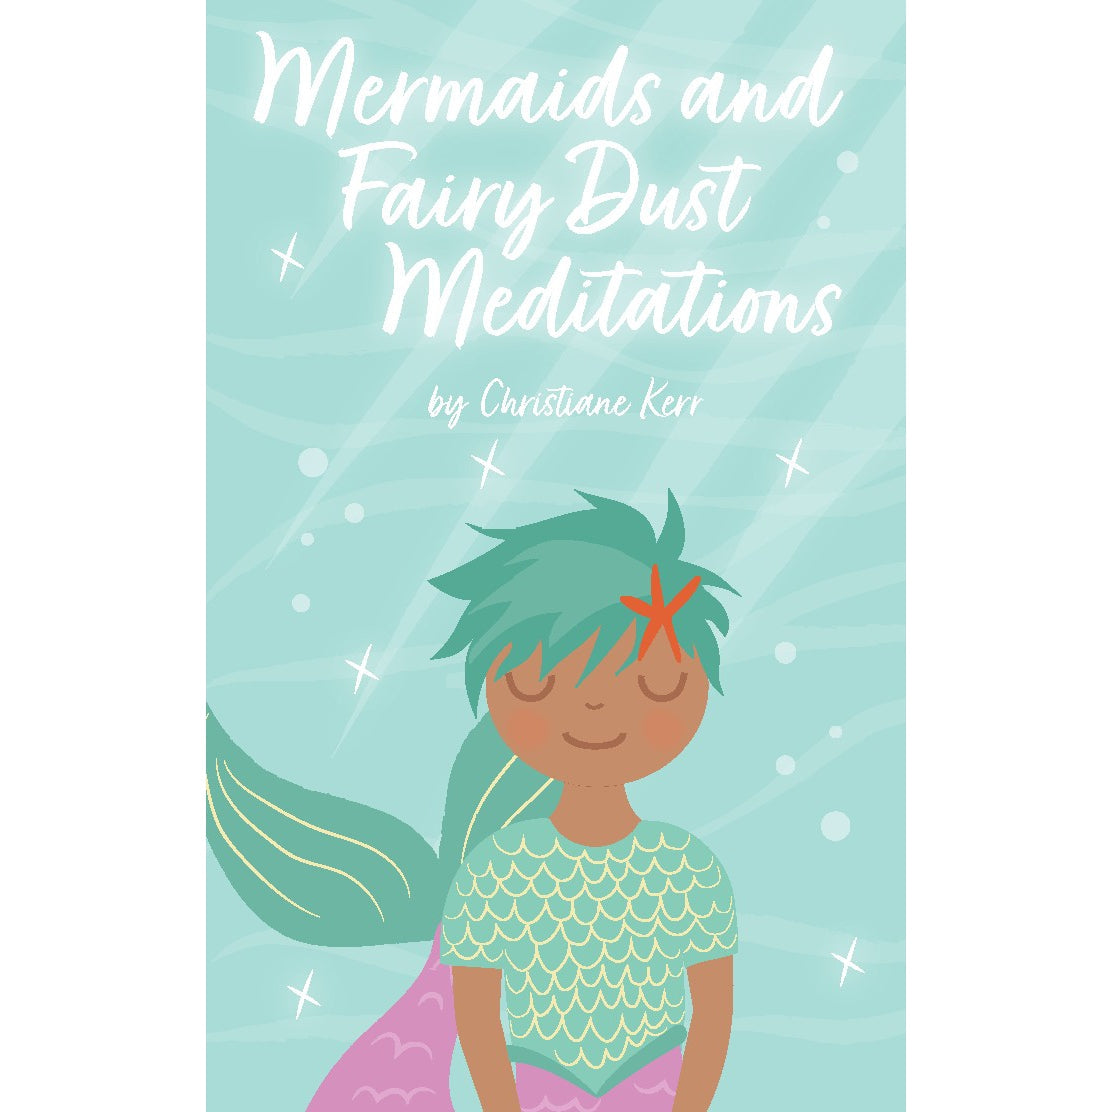 Yoto Card - Mermaids and Fairy Dust Meditations - Child Friendly Audio Mindfulness Card for the Yoto Player